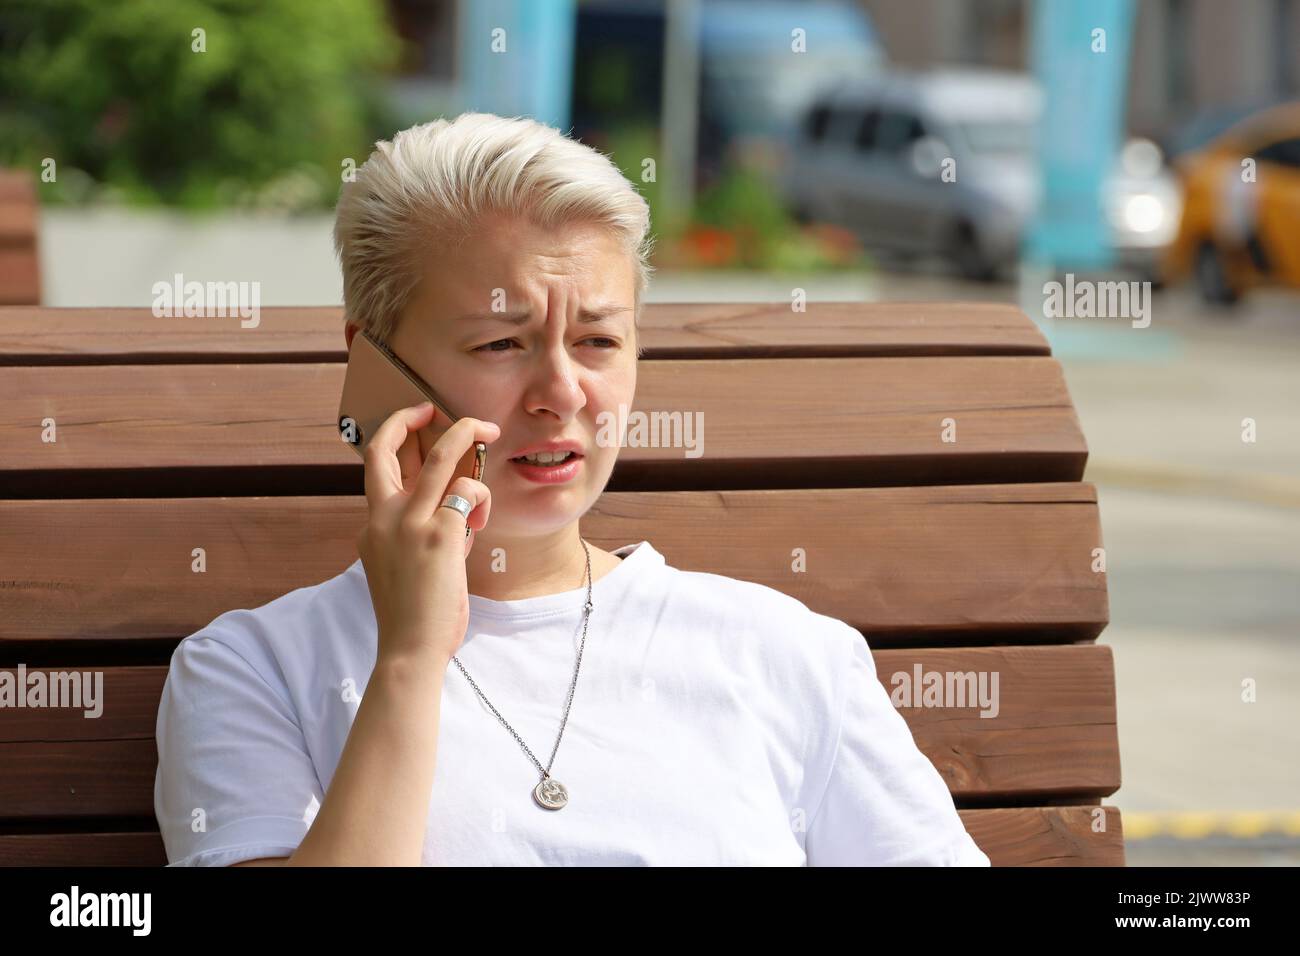 Girl with short blonde hair talking on mobile phone while sitting on street wooden bench. Tomboy lifestyle in summer or autumn city Stock Photo